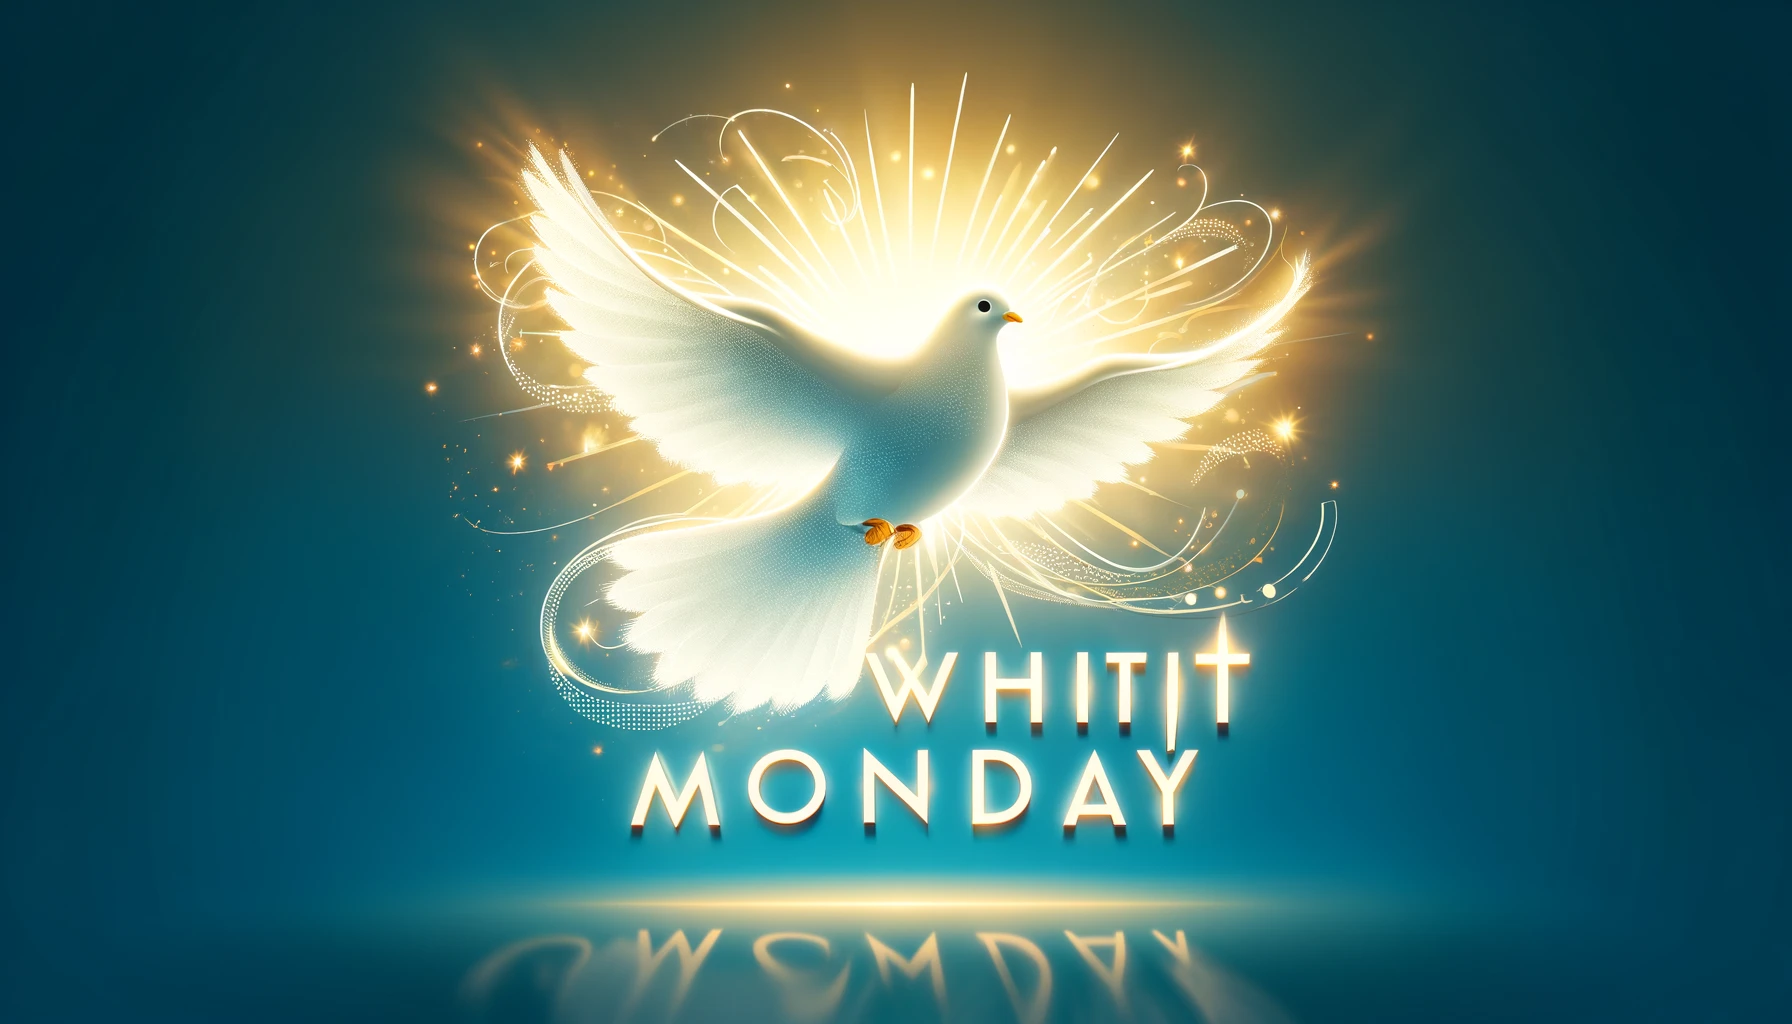 Personalized Whit Monday Messages for Everyone